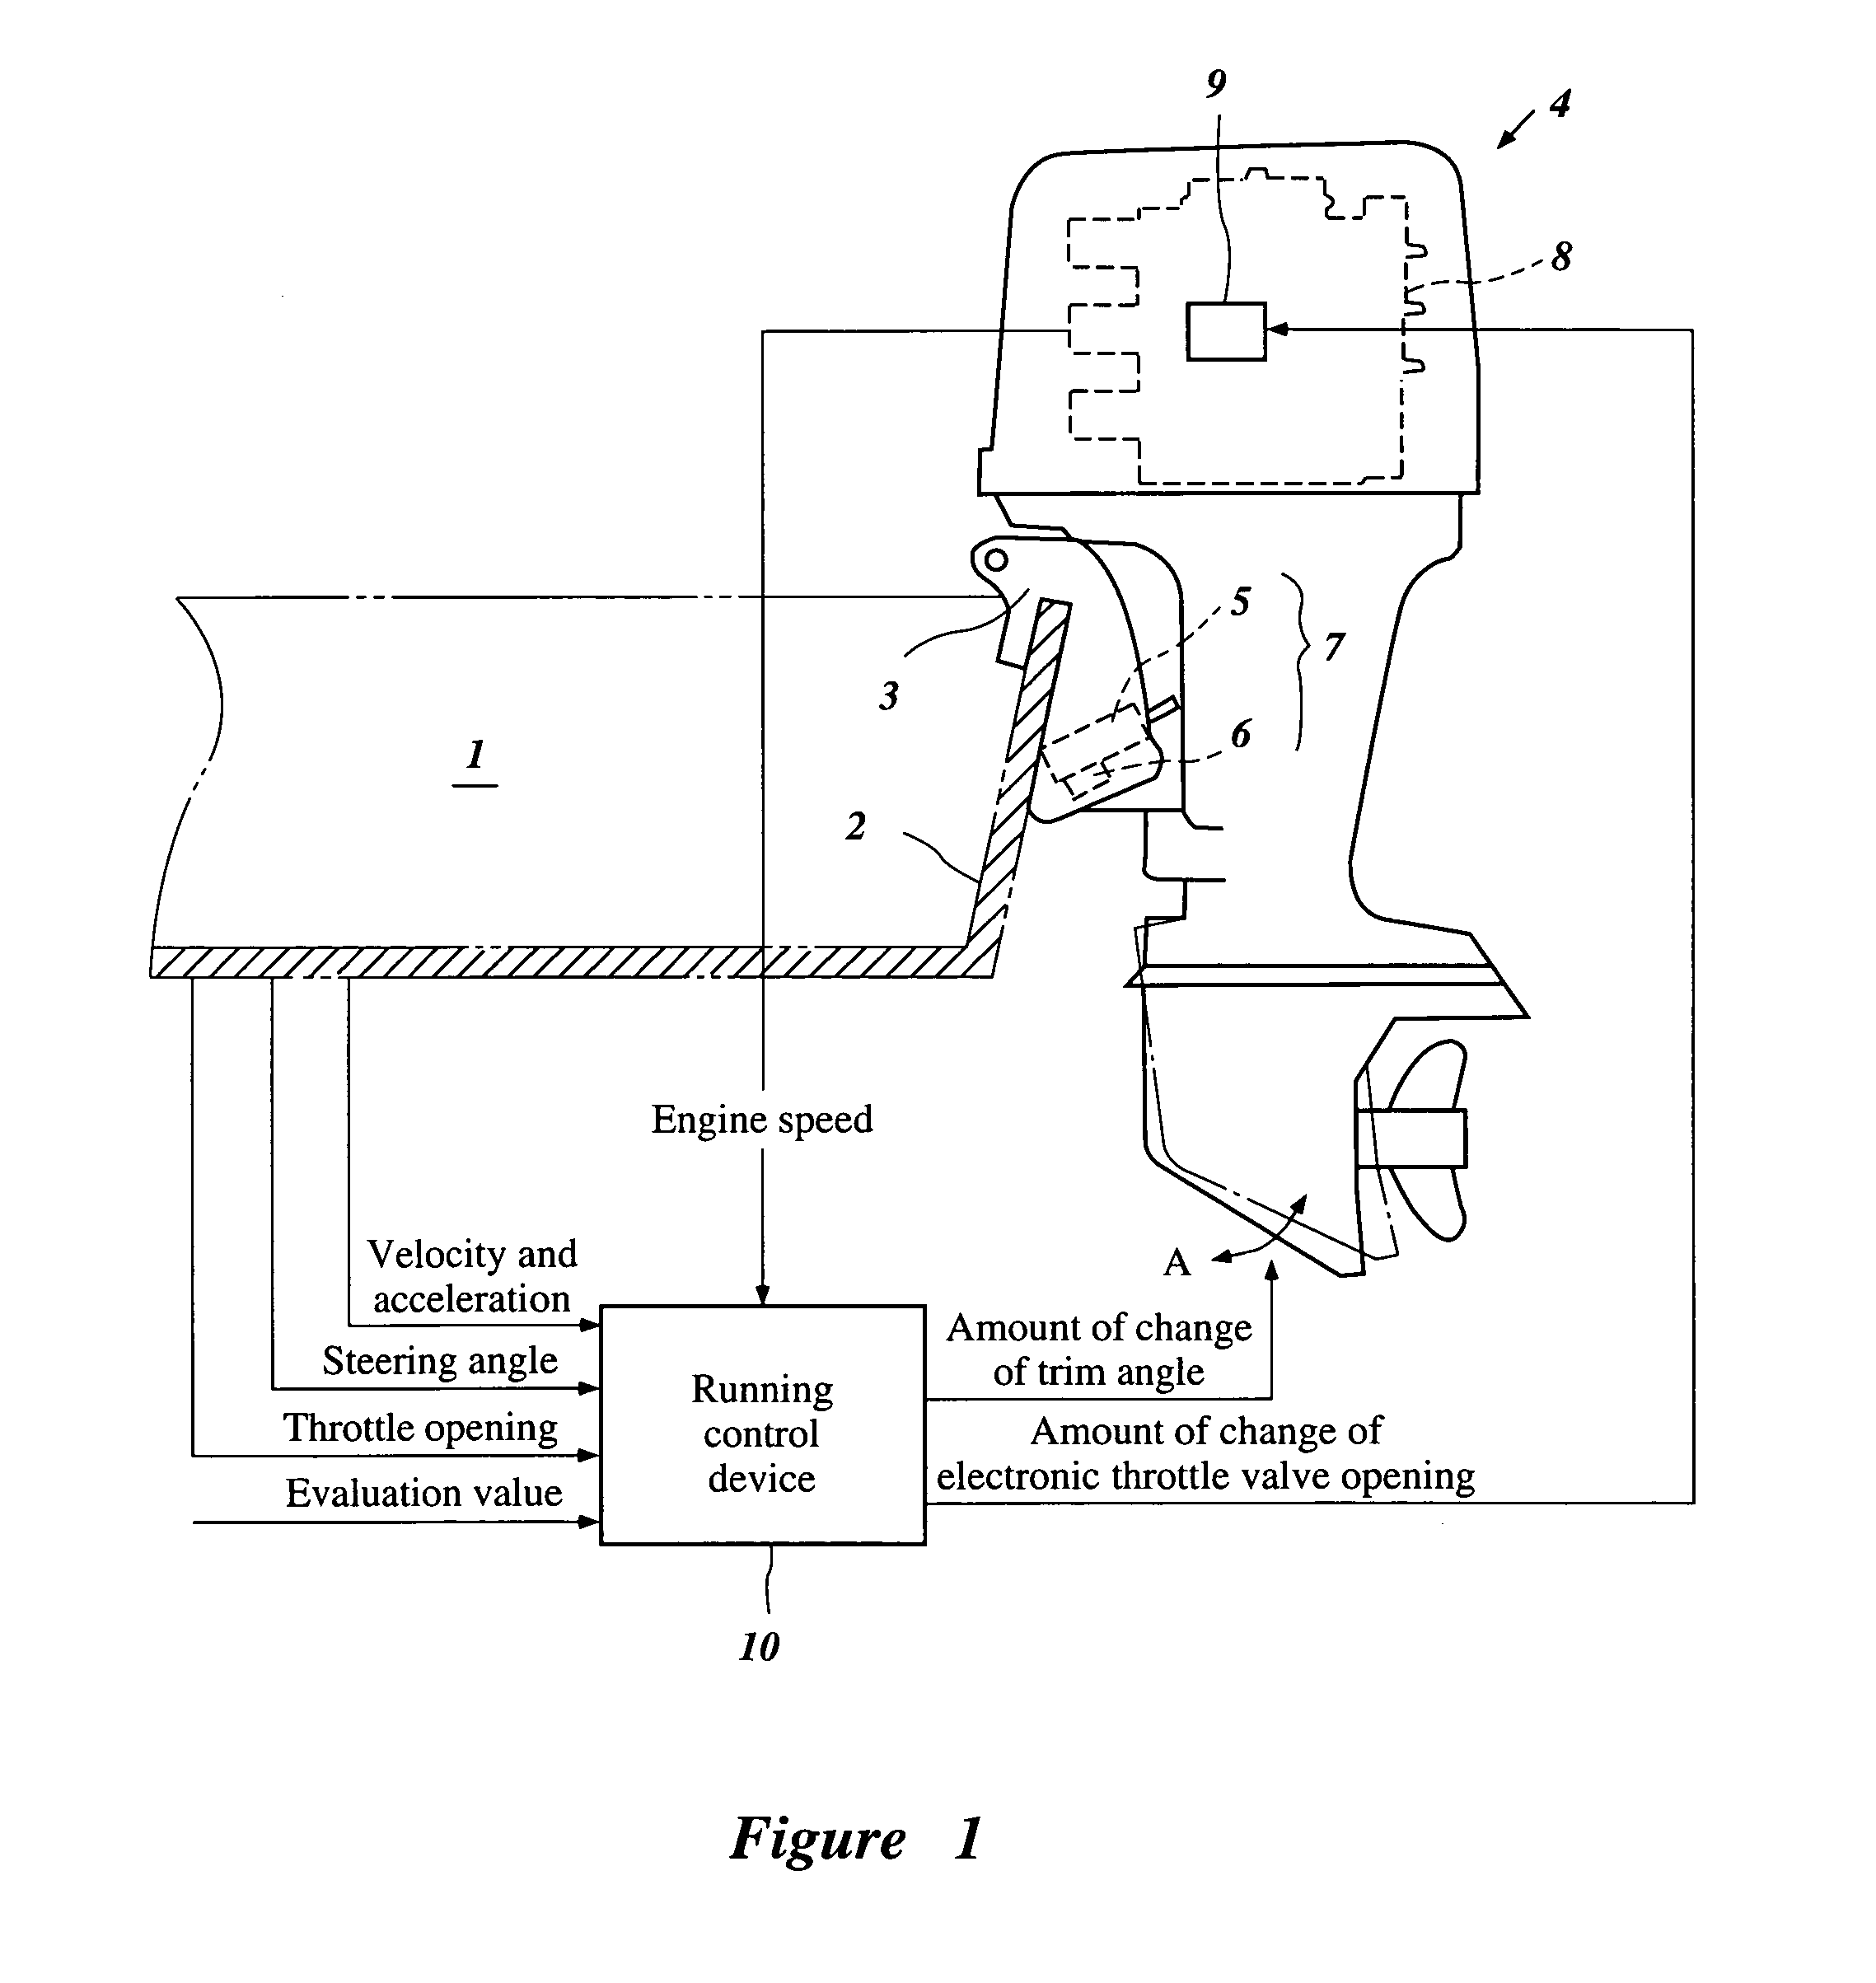 Running control device